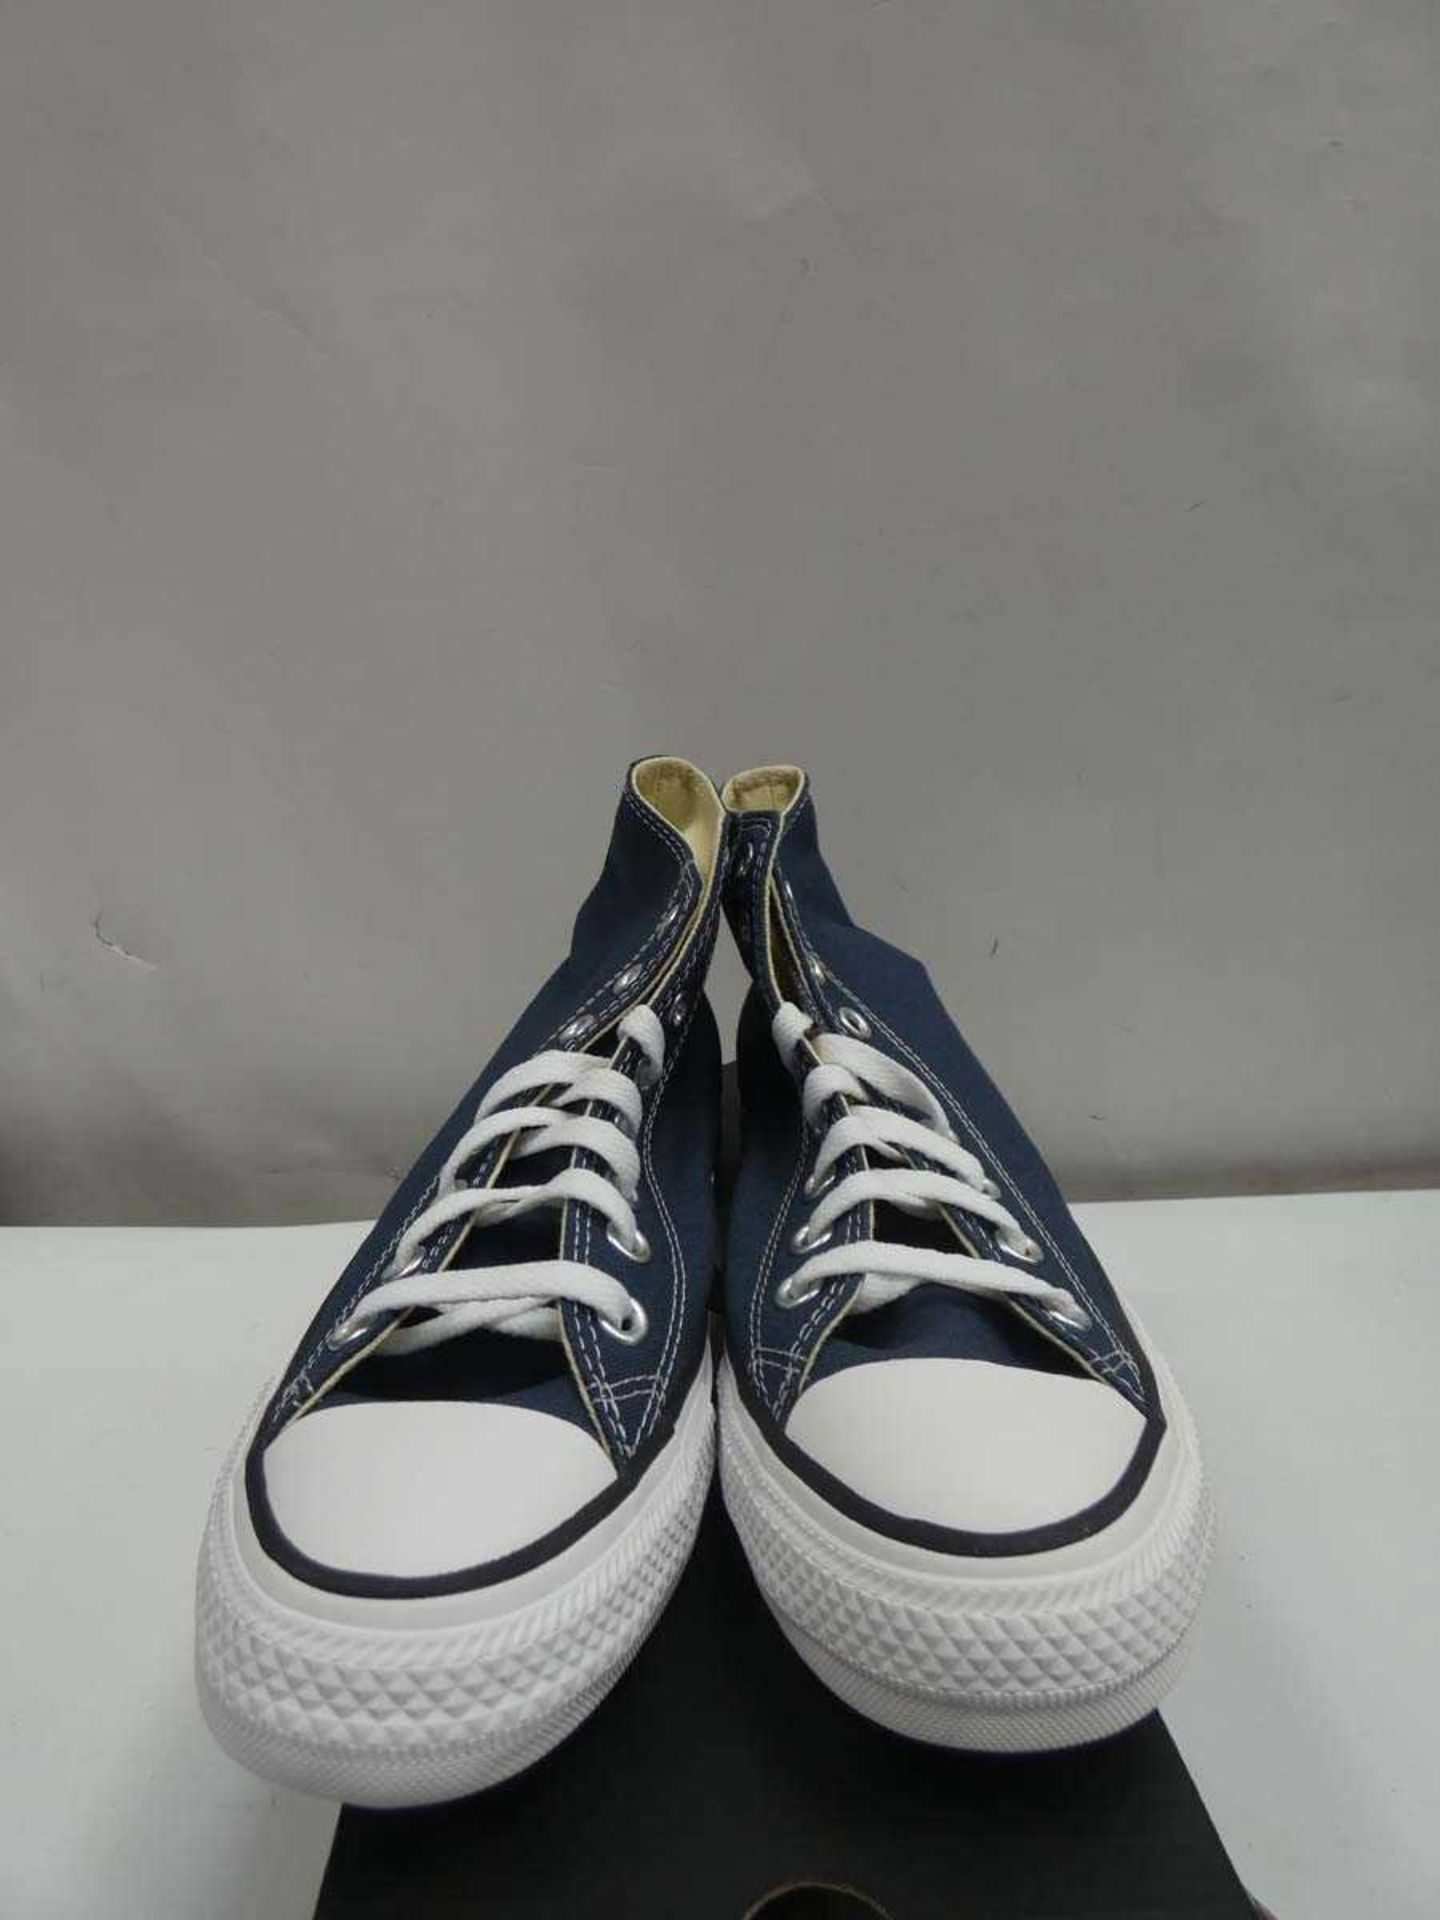 +VAT Pair of Converse Size 6.5 - Image 2 of 3